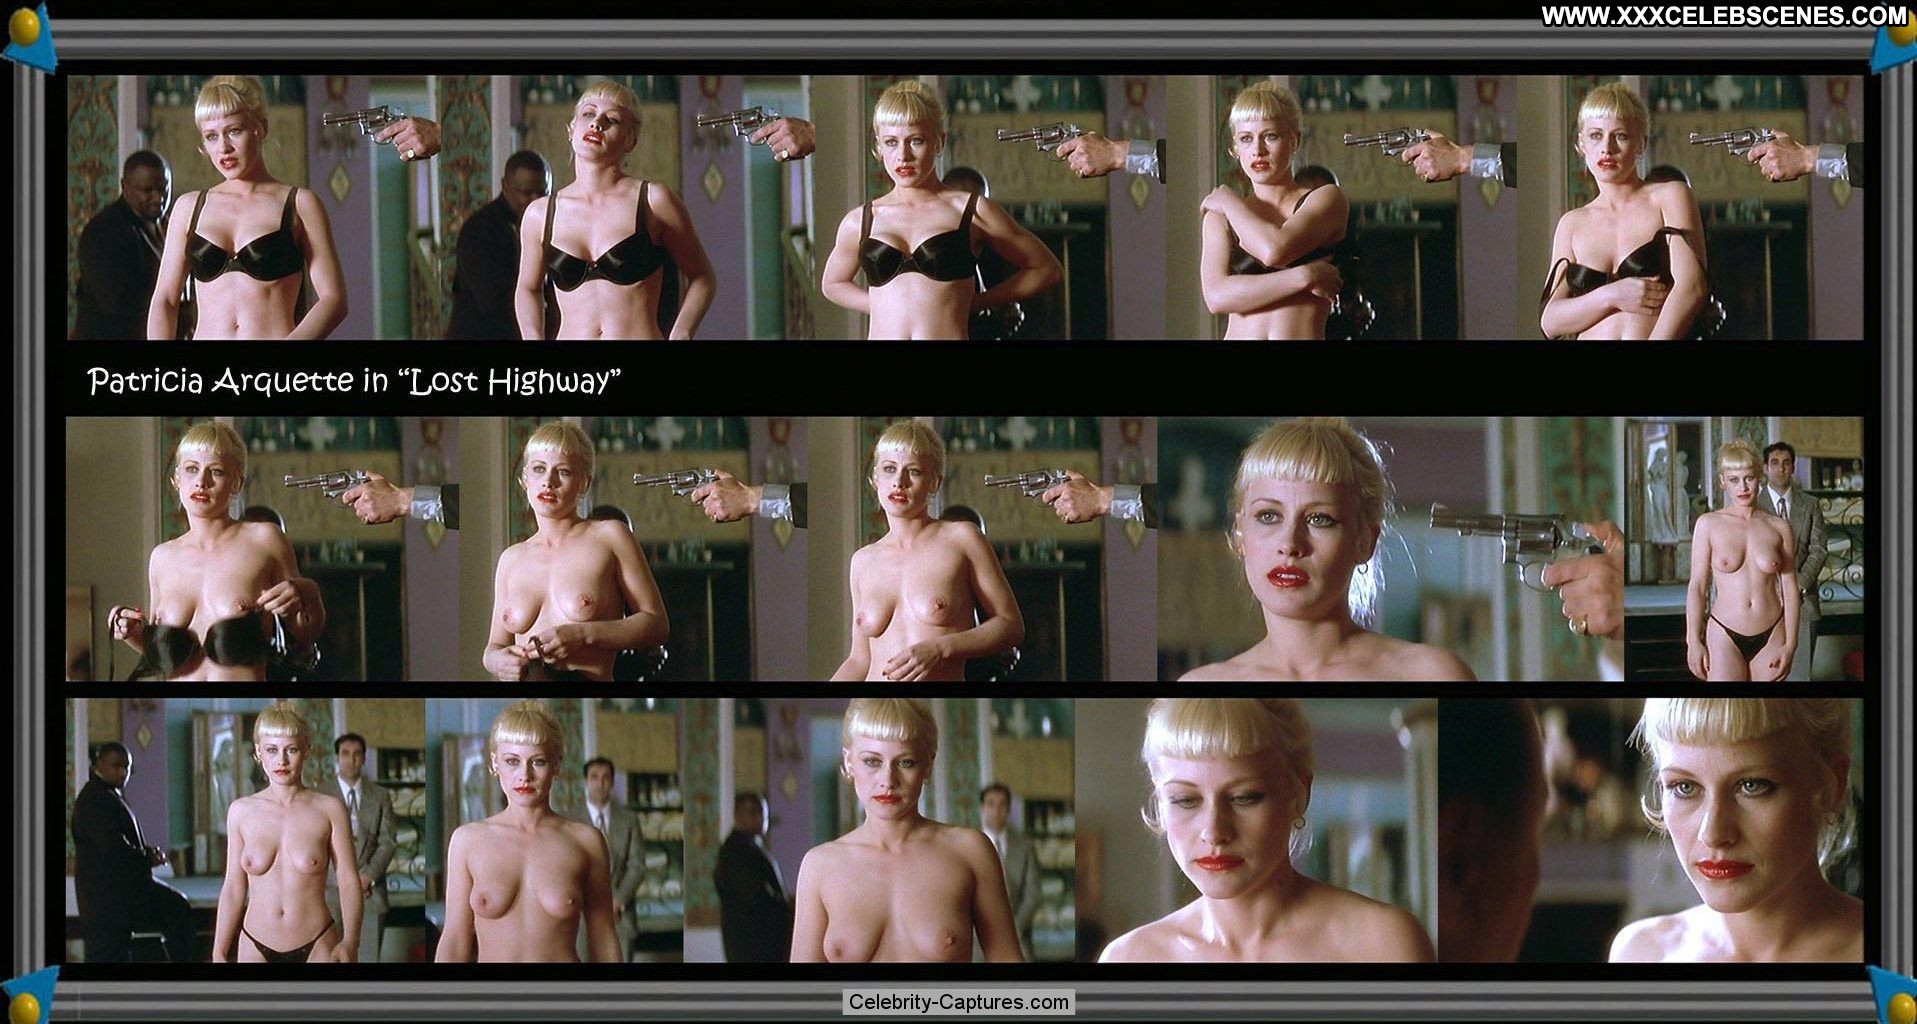 Patricia Arquette Lost Highway Lost Highway Celebrity Beautiful Babe Posing...